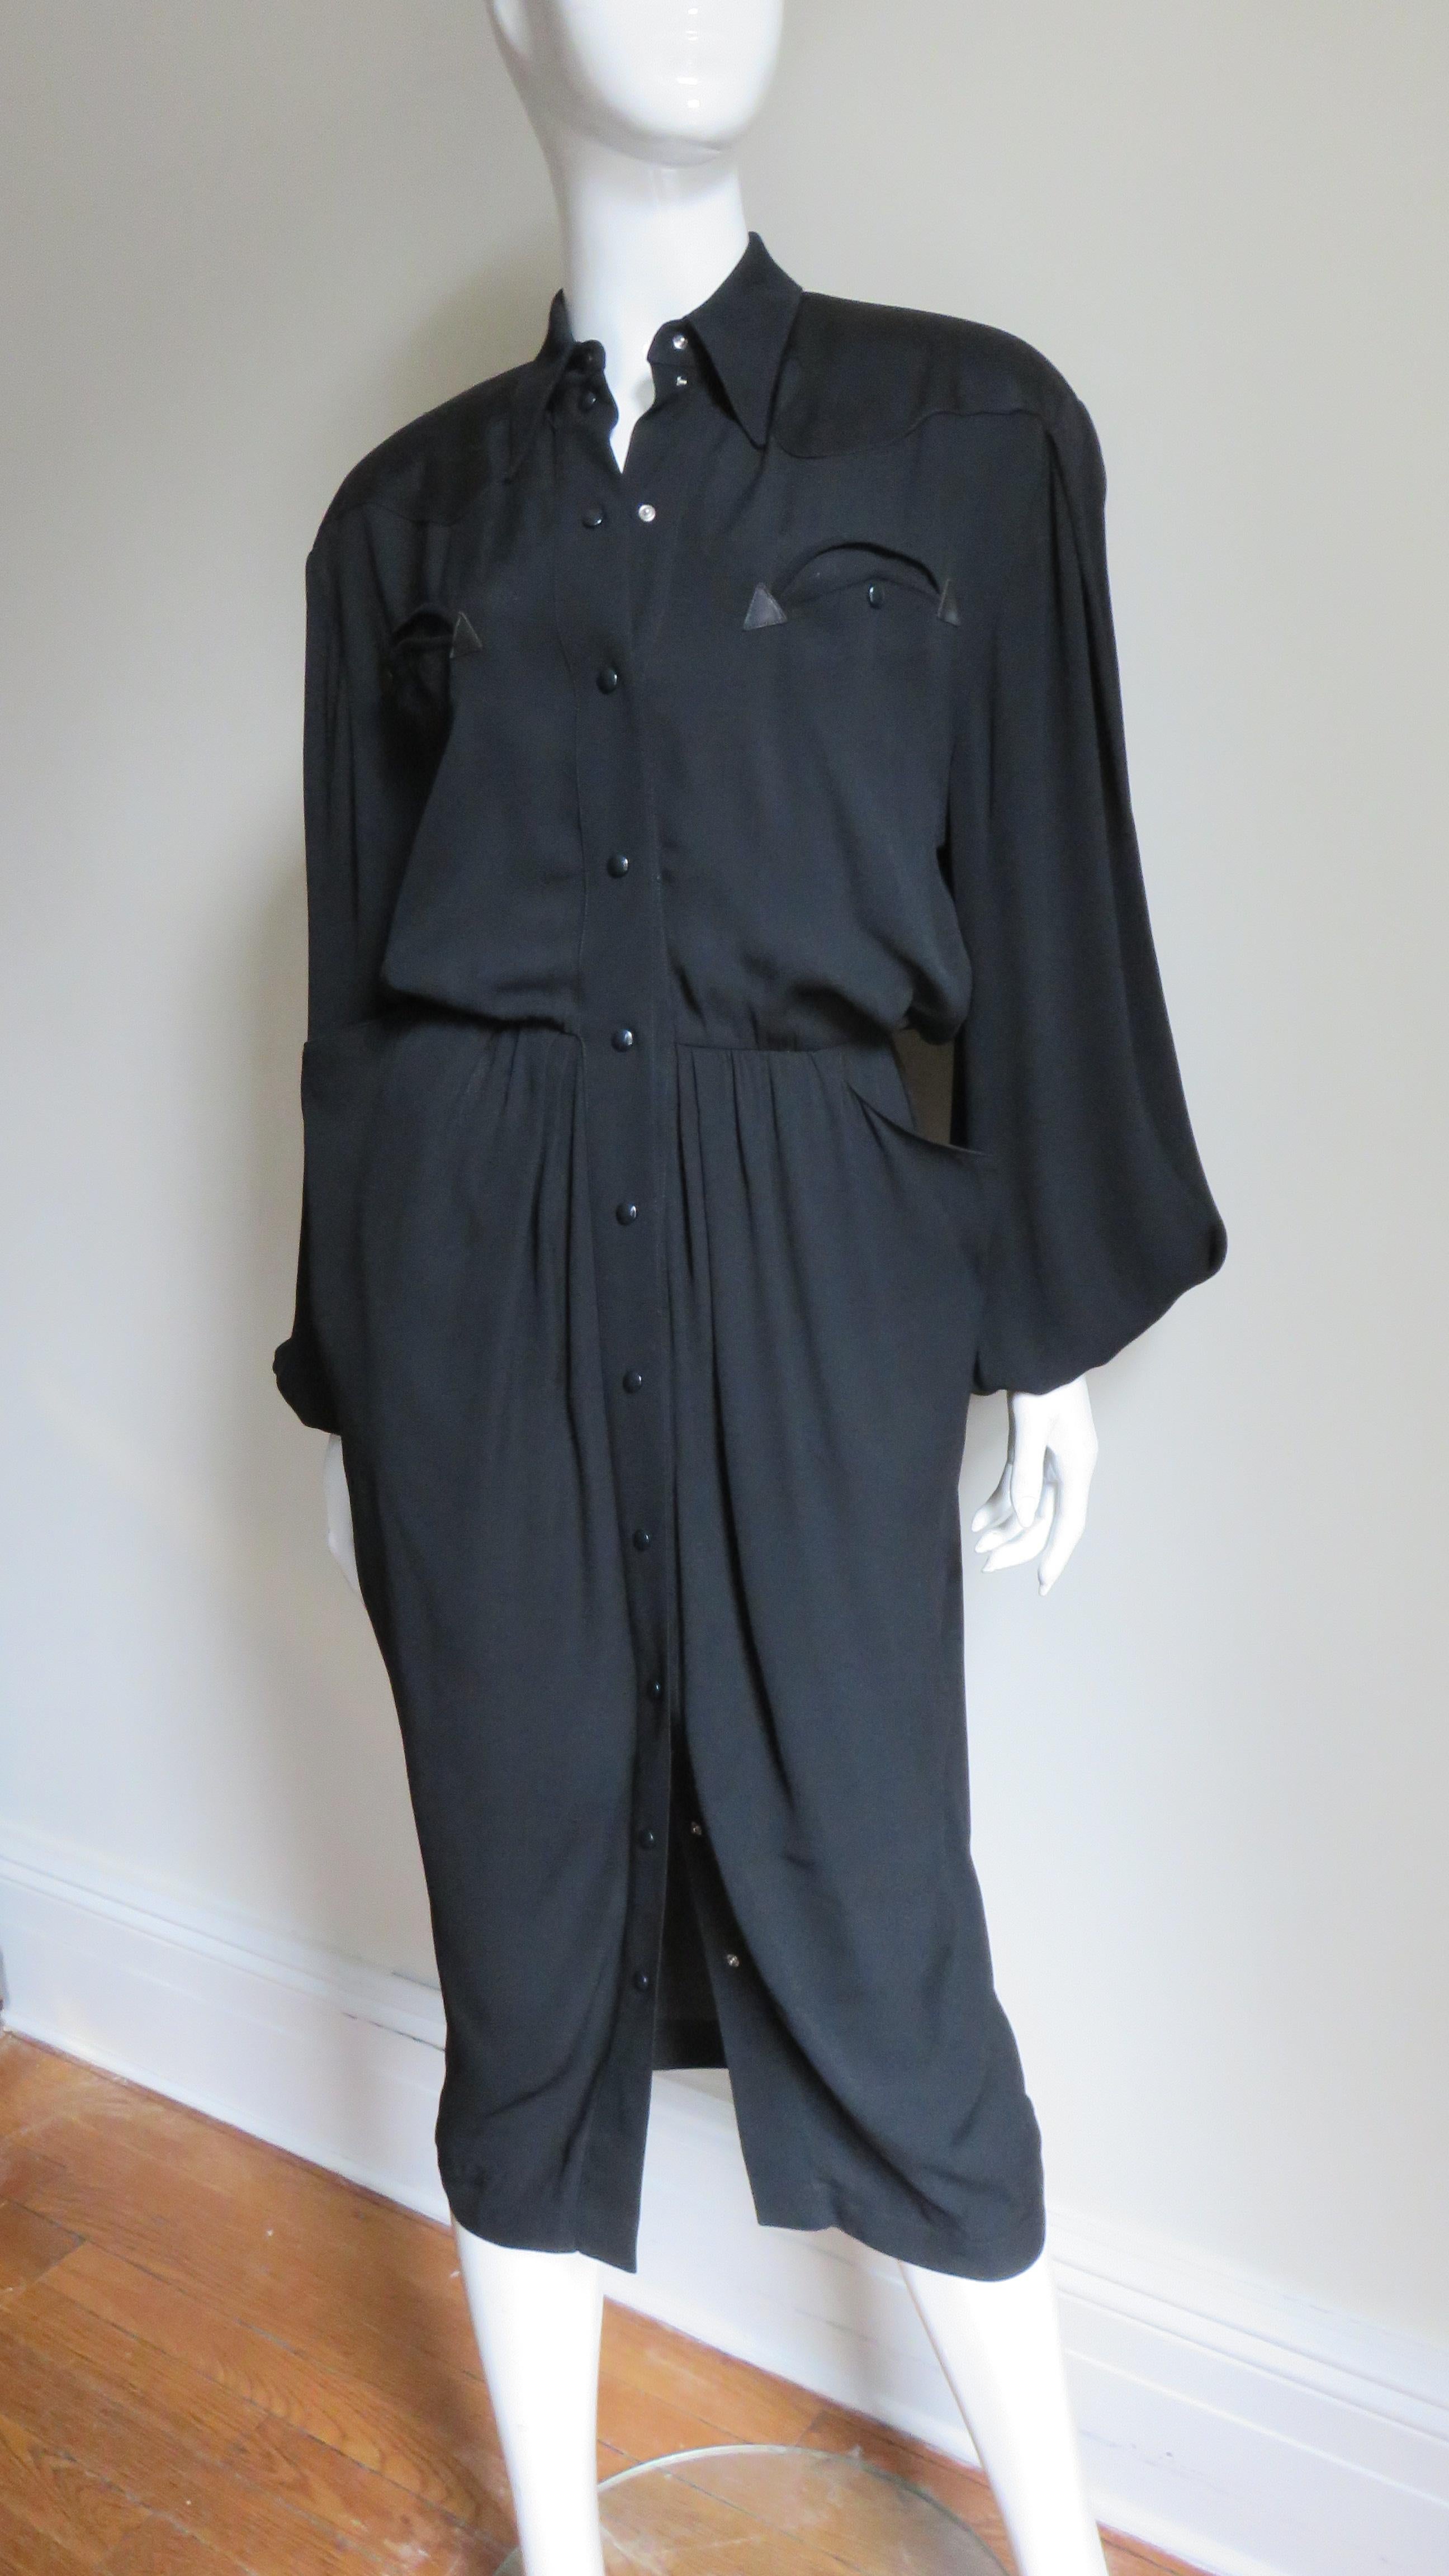 A fabulous black dress from Thierry Mugler with lots a great detail.  It has a shirt collar, curved chest pockets, balloon sleeves with curved cuffs, and light shoulder pads.  There are rounded yokes front and back.  The bodice is blouson and